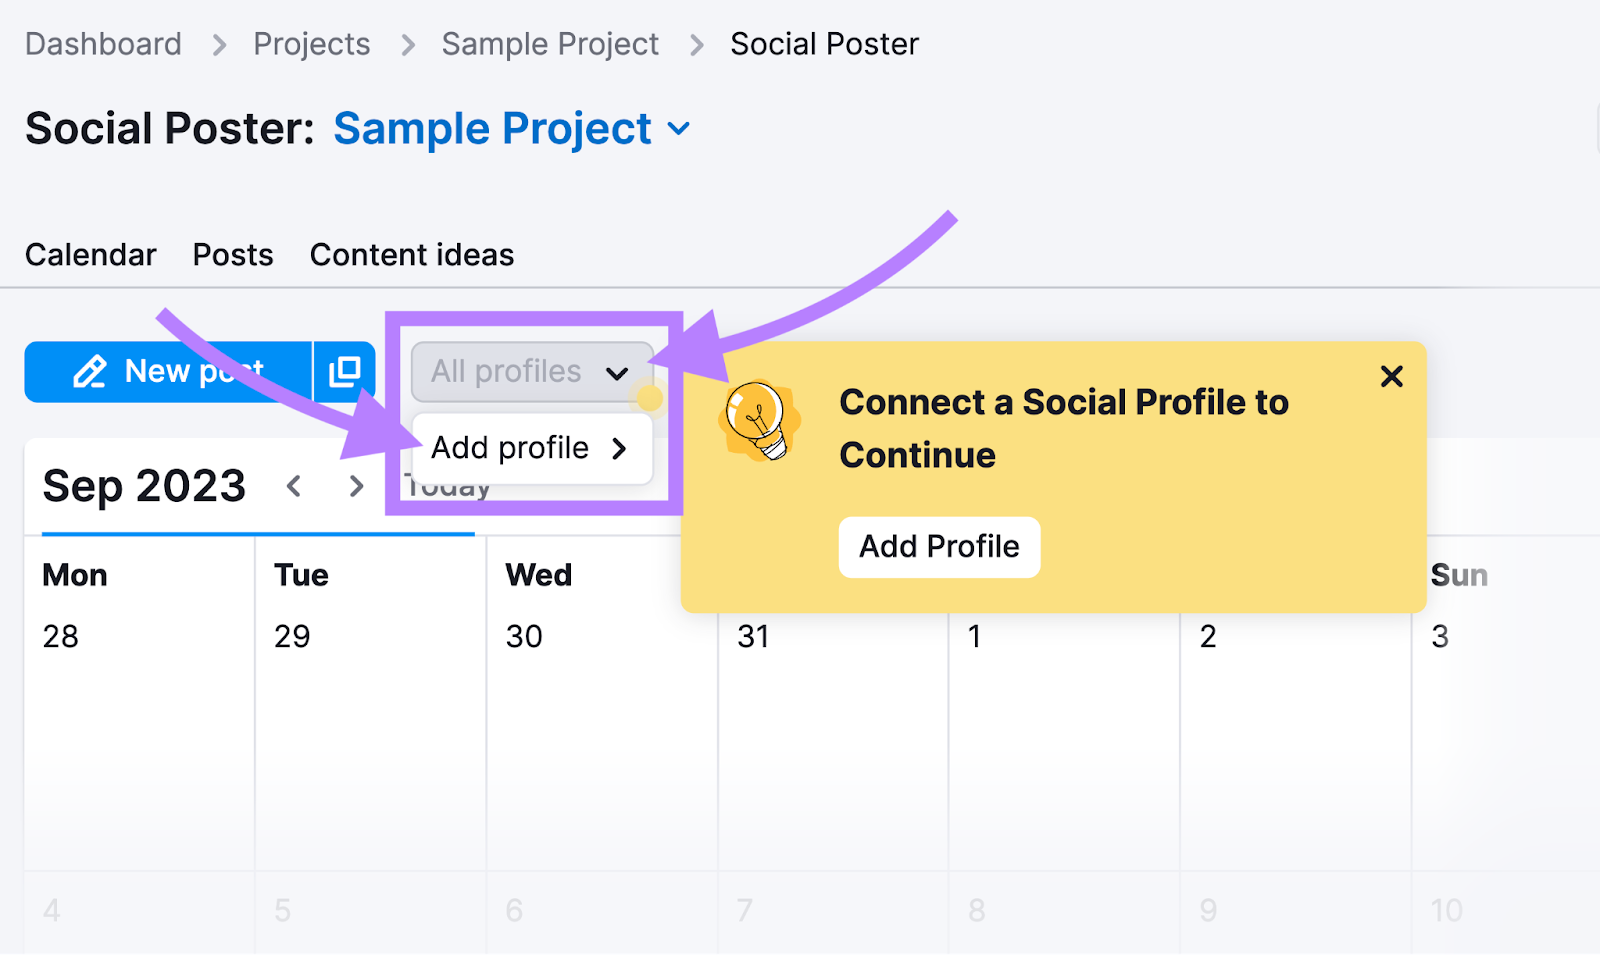 Connecting your social accounts to Social Poster